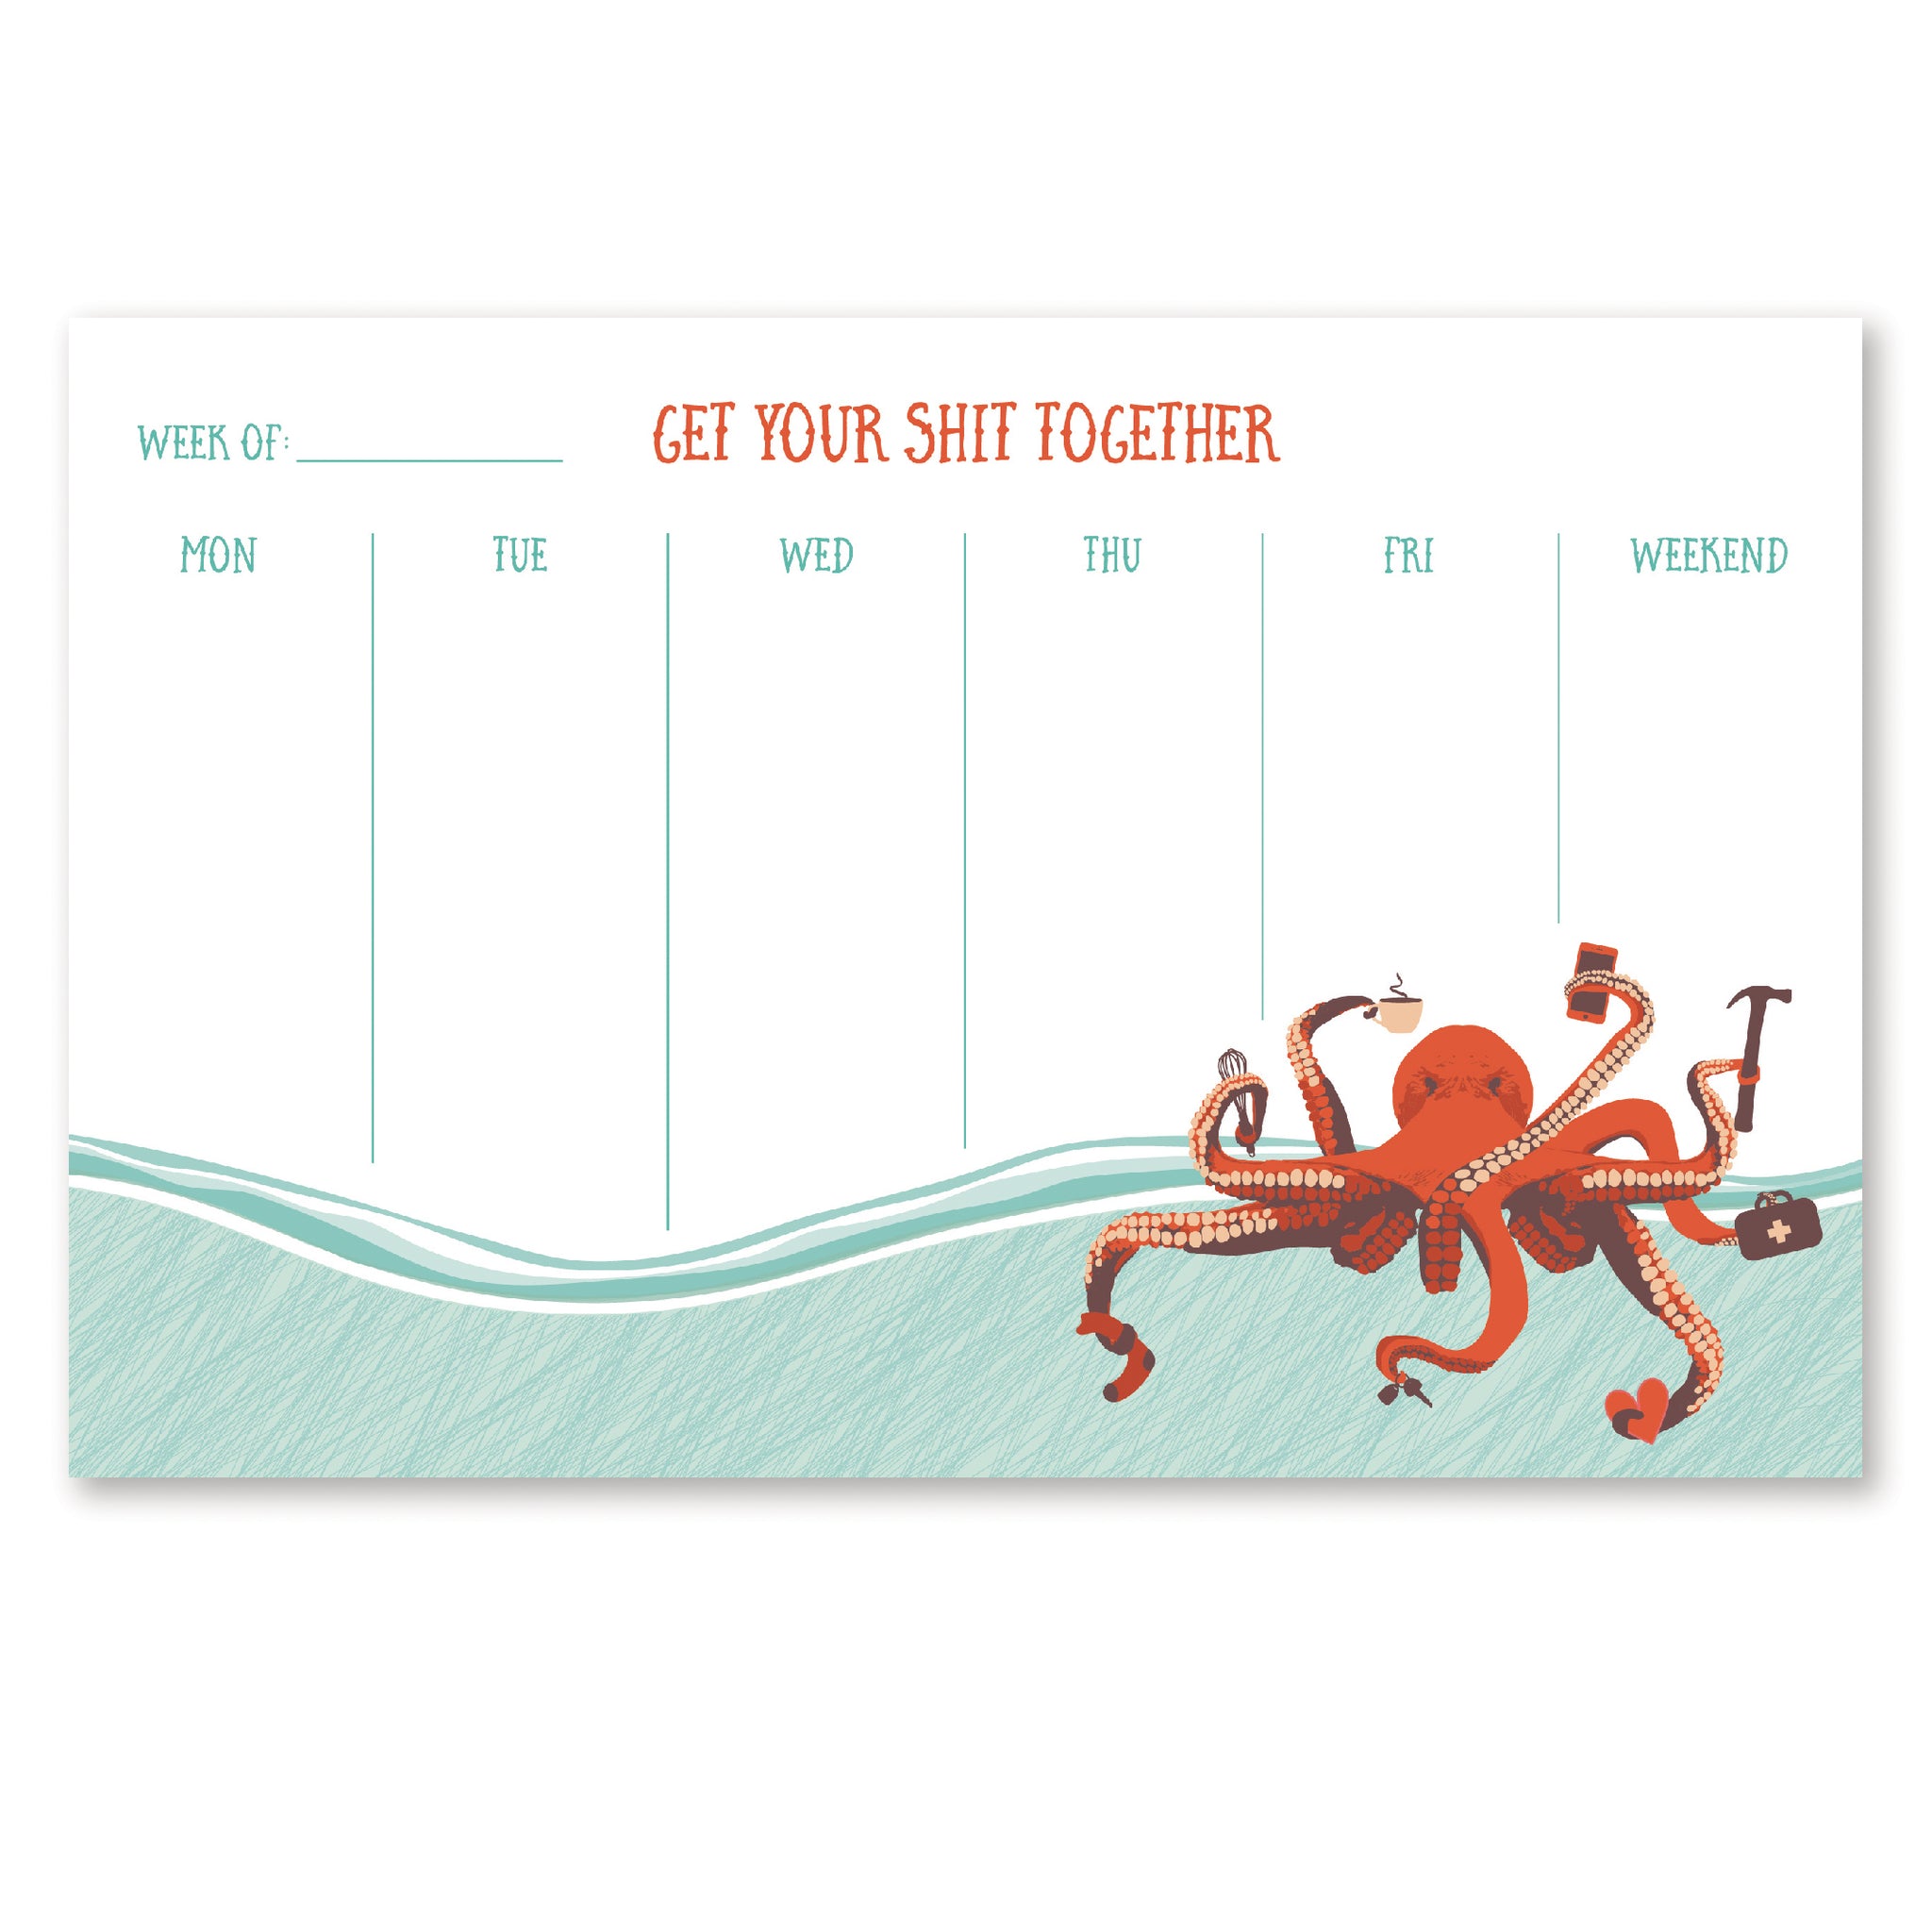 GET YOUR SHIT TOGETHER WEEKLY PLANNER NOTEPAD